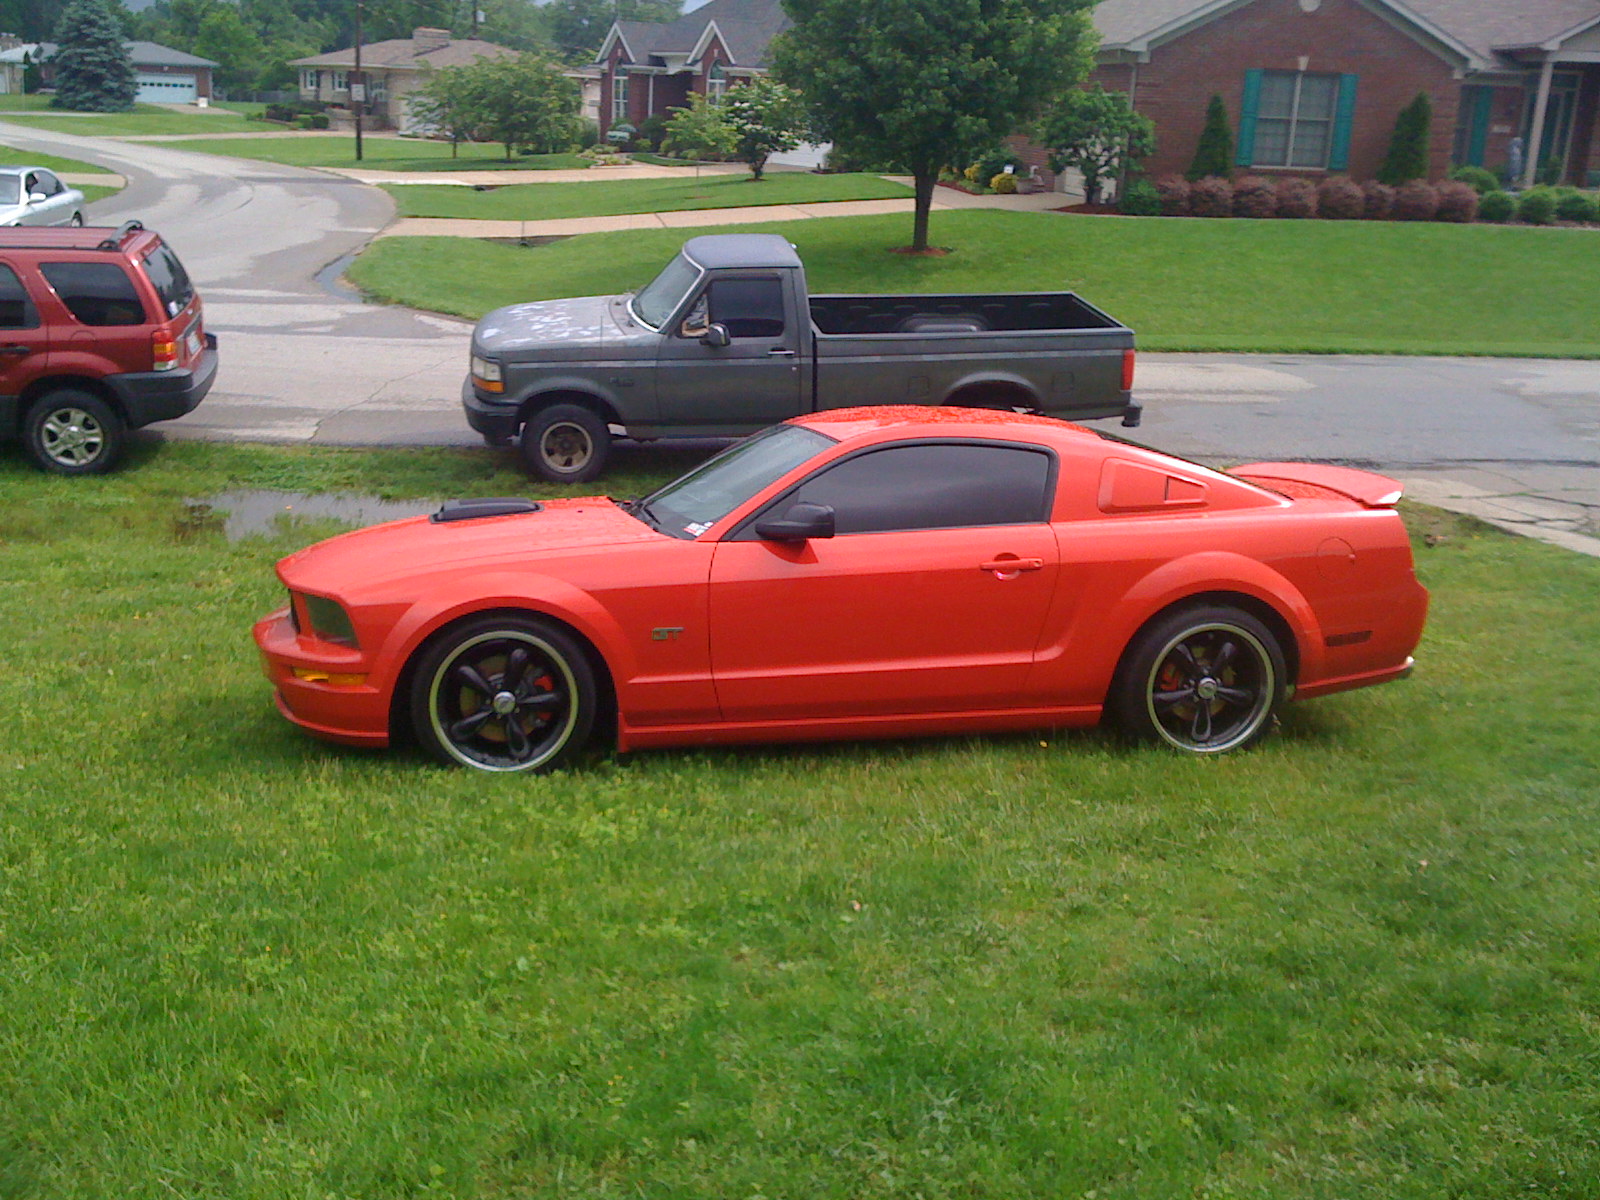 2005 Ford mustang quarter mile time #9